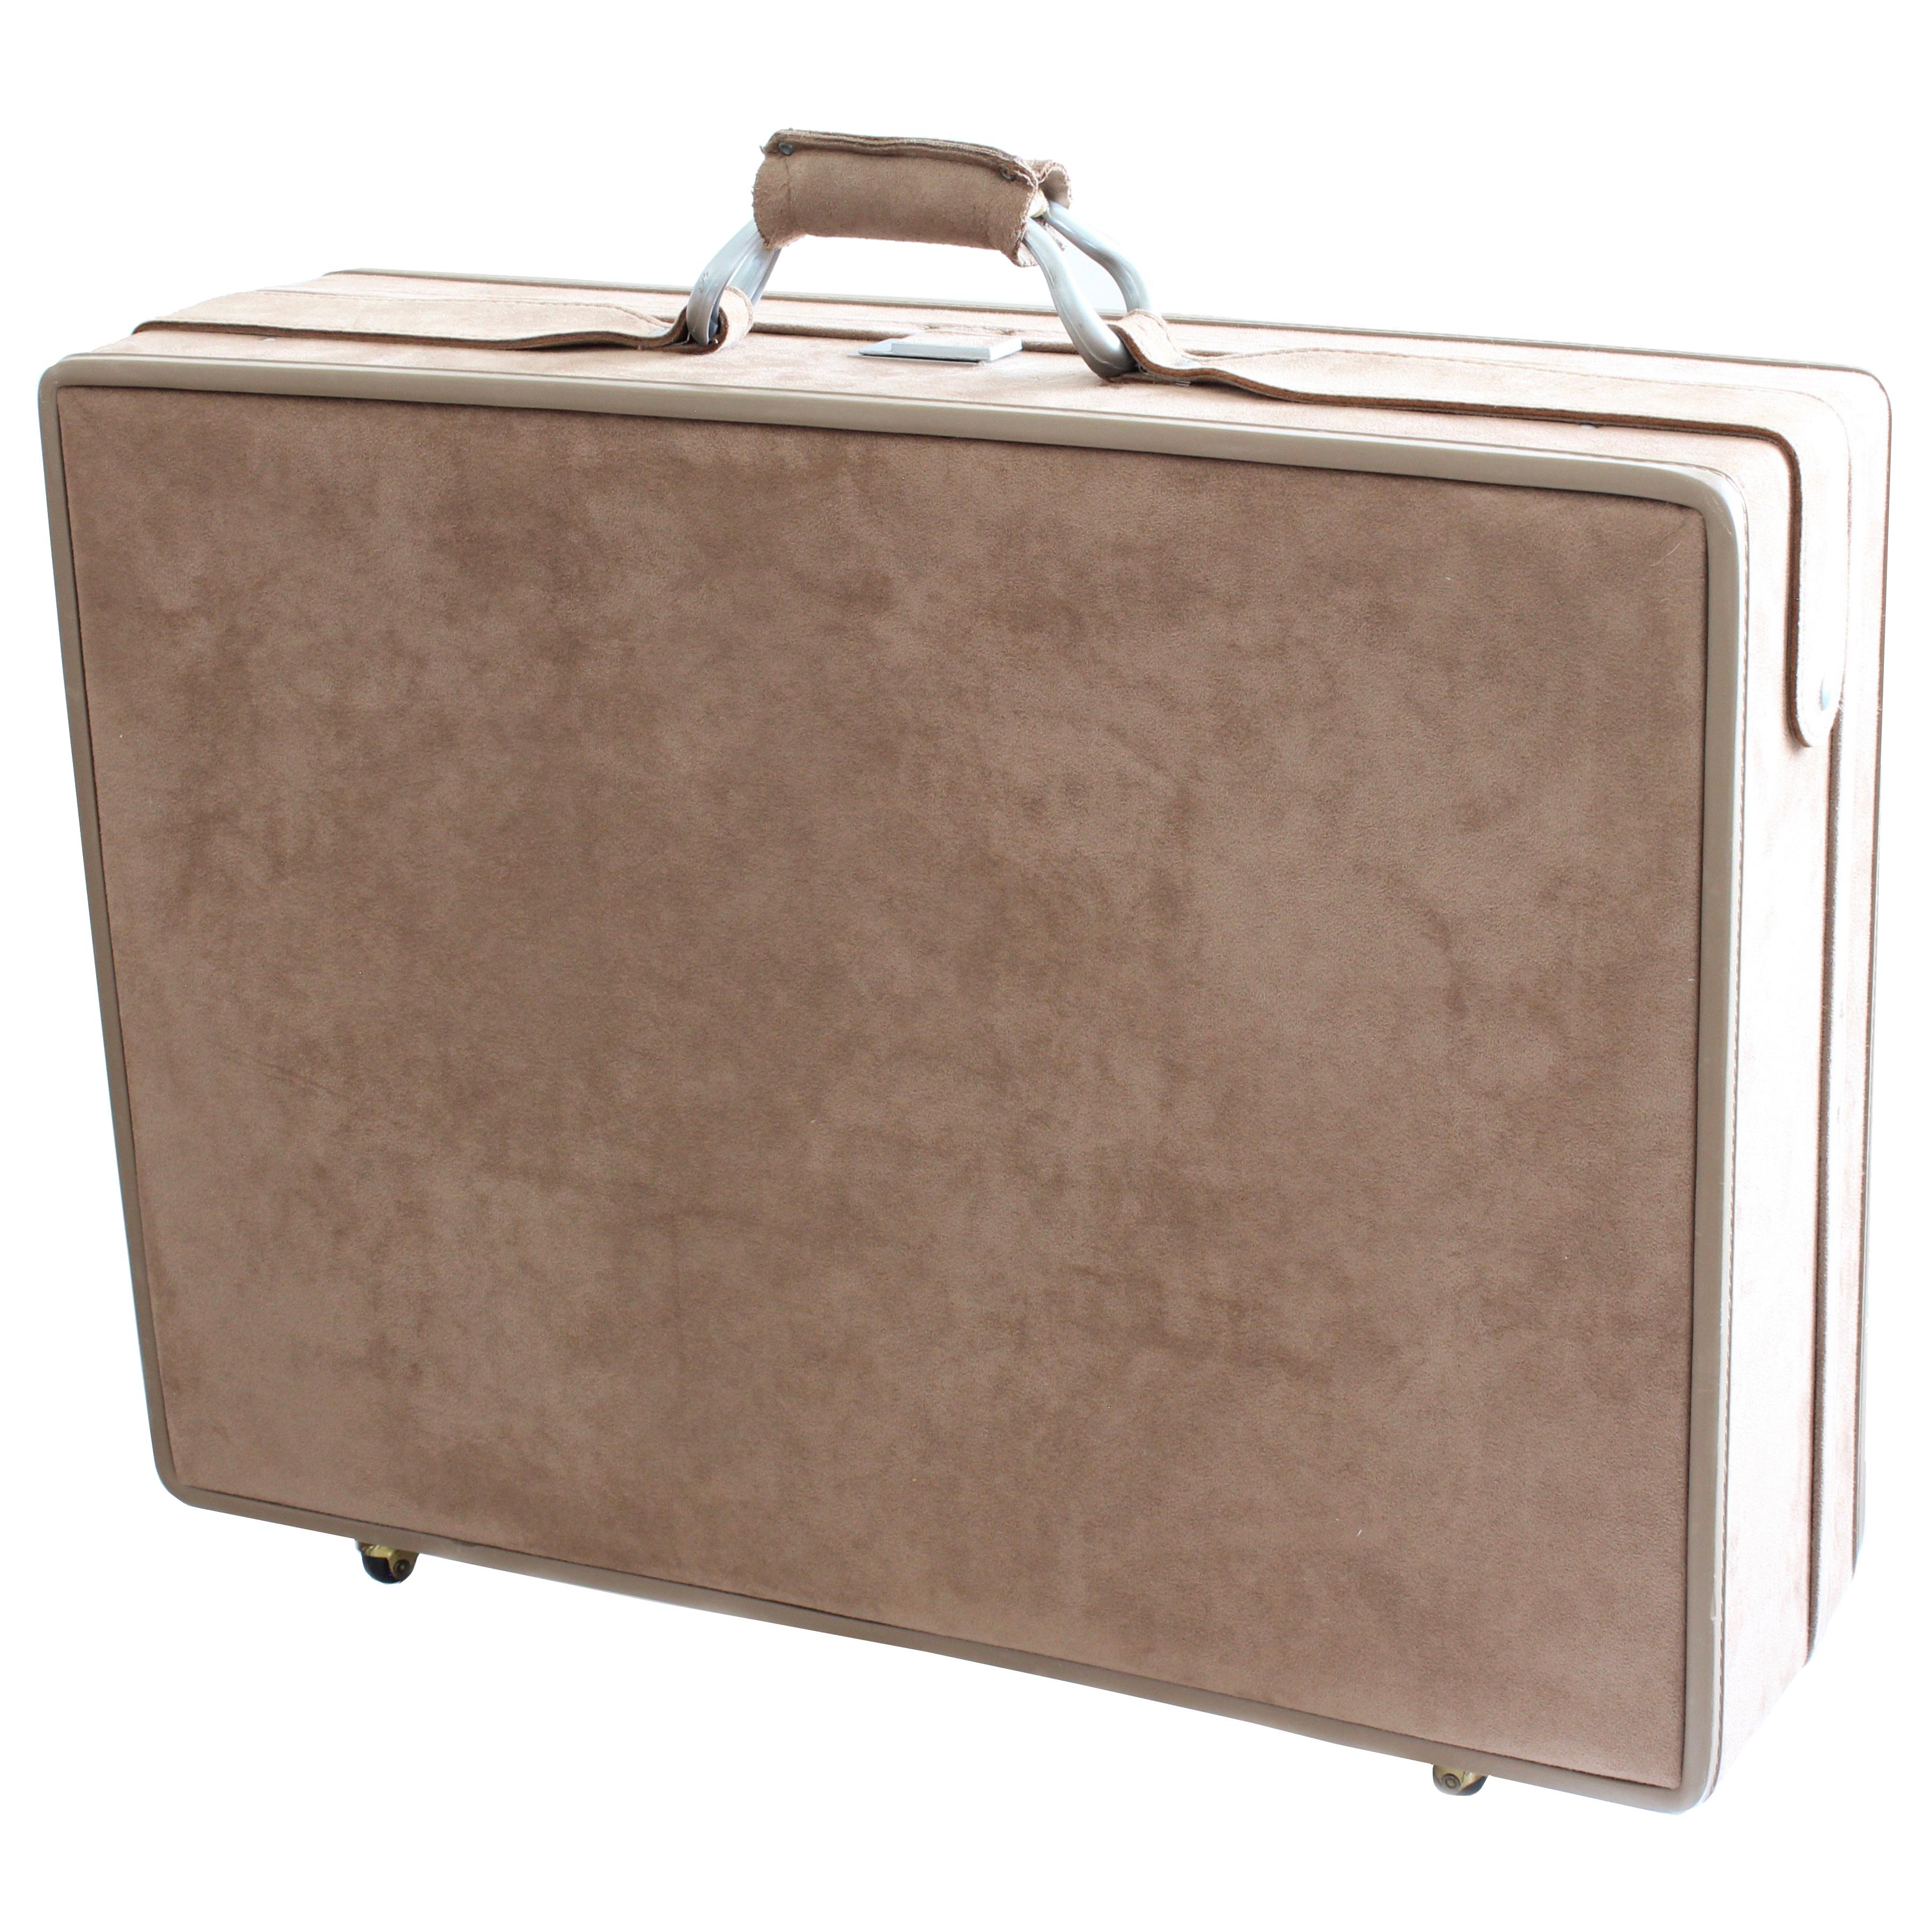 Halston for Hartmann Sueded 25 Inch Rolling Suitcase with Keys and Luggage Tag